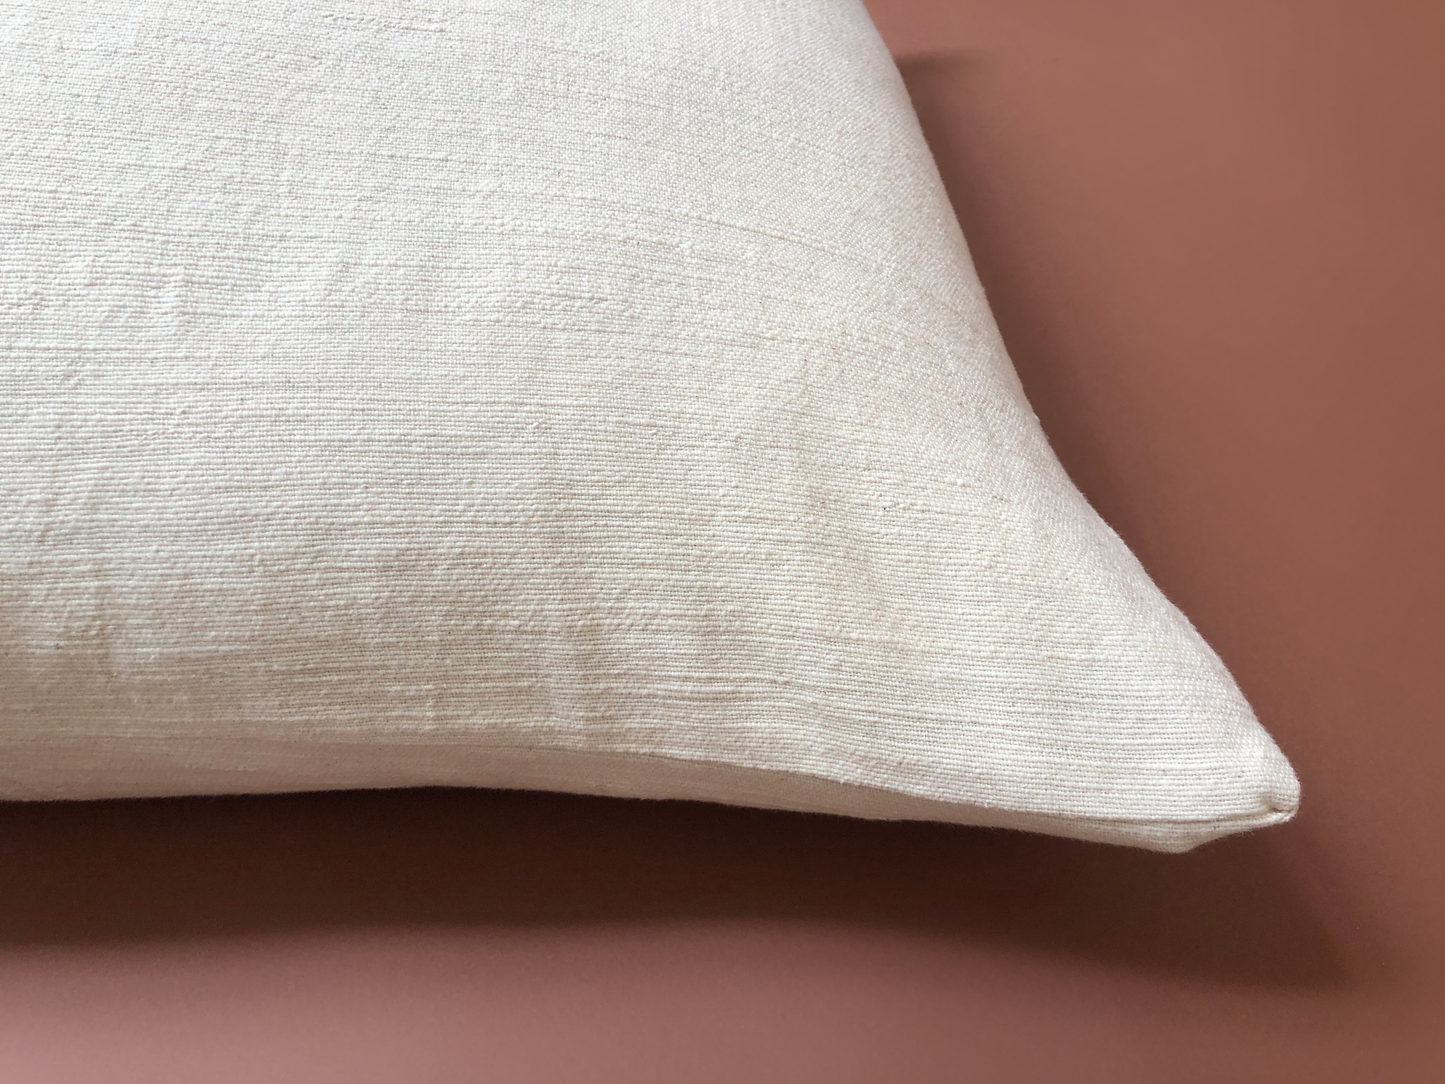 White Pillow Cover 28x28 inches